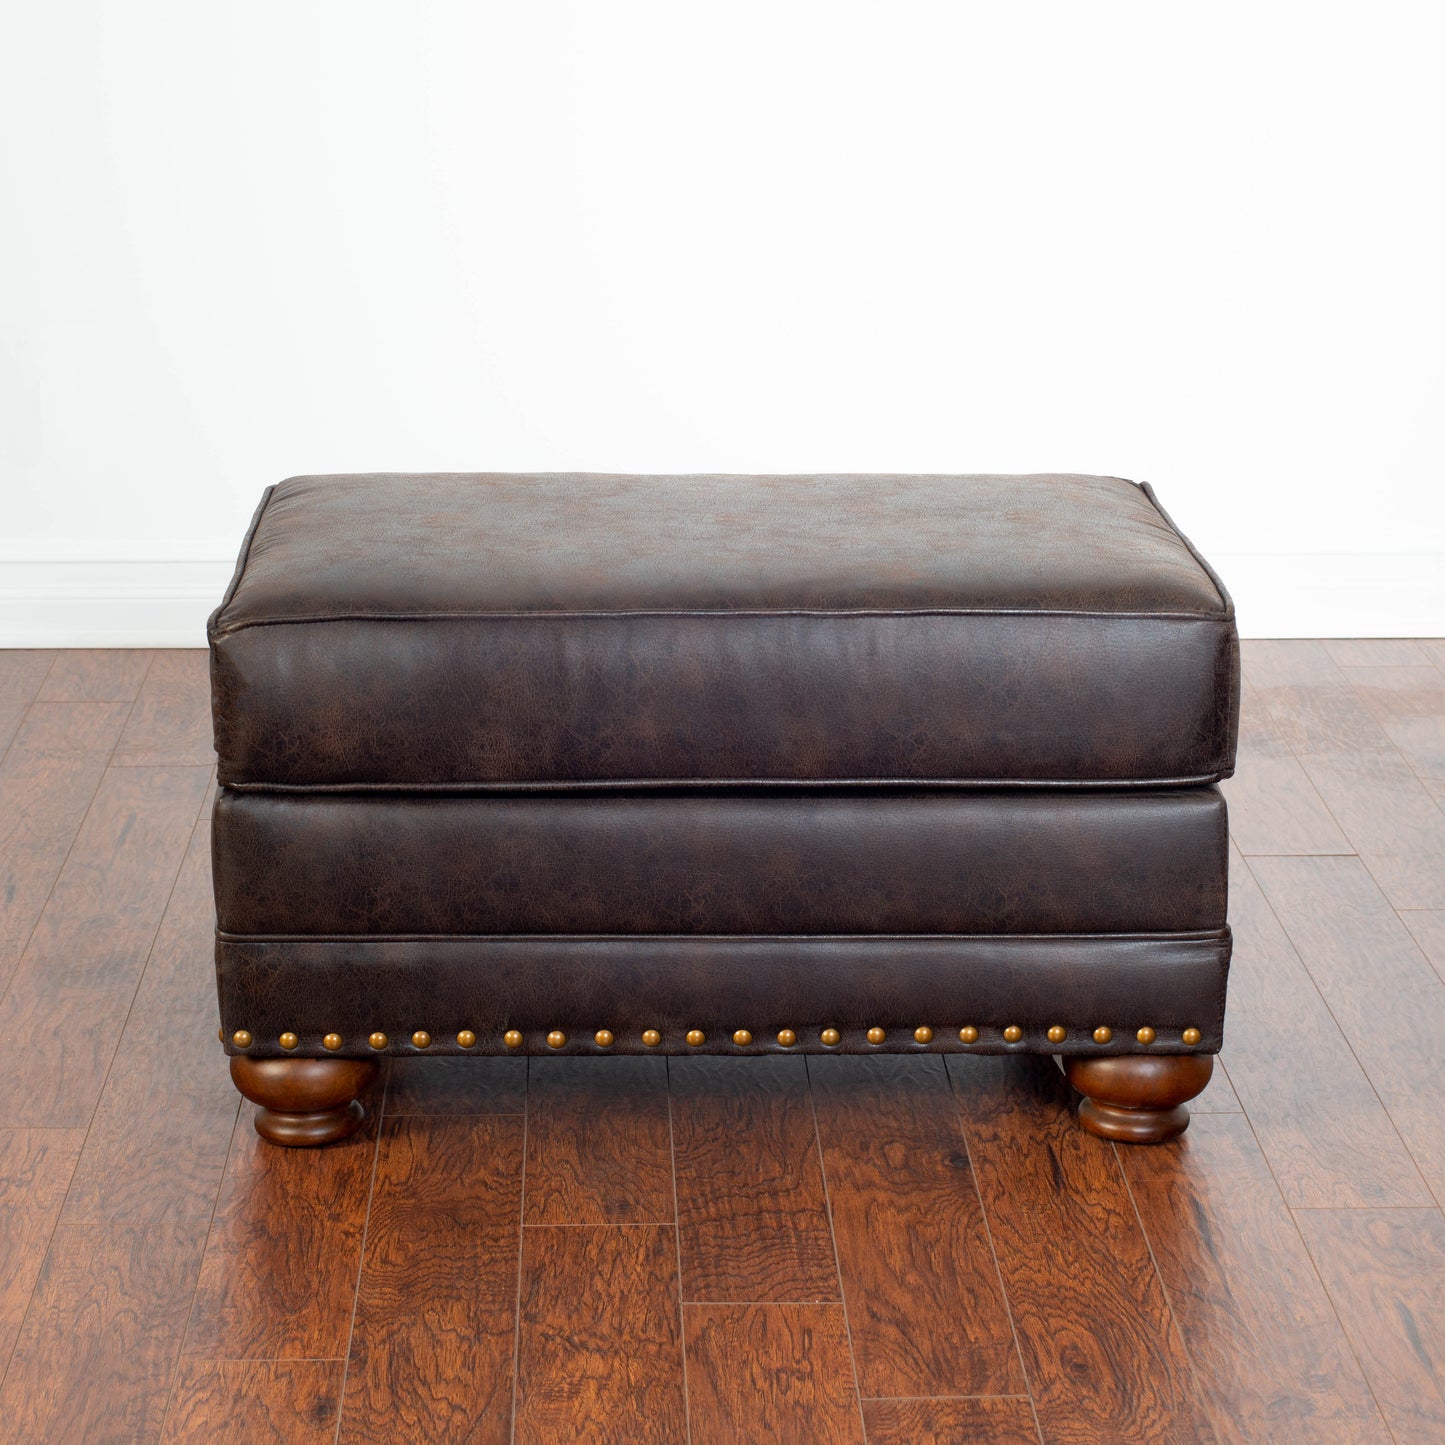 Leinster Faux Leather Upholstered Nailhead Ottoman in Espresso